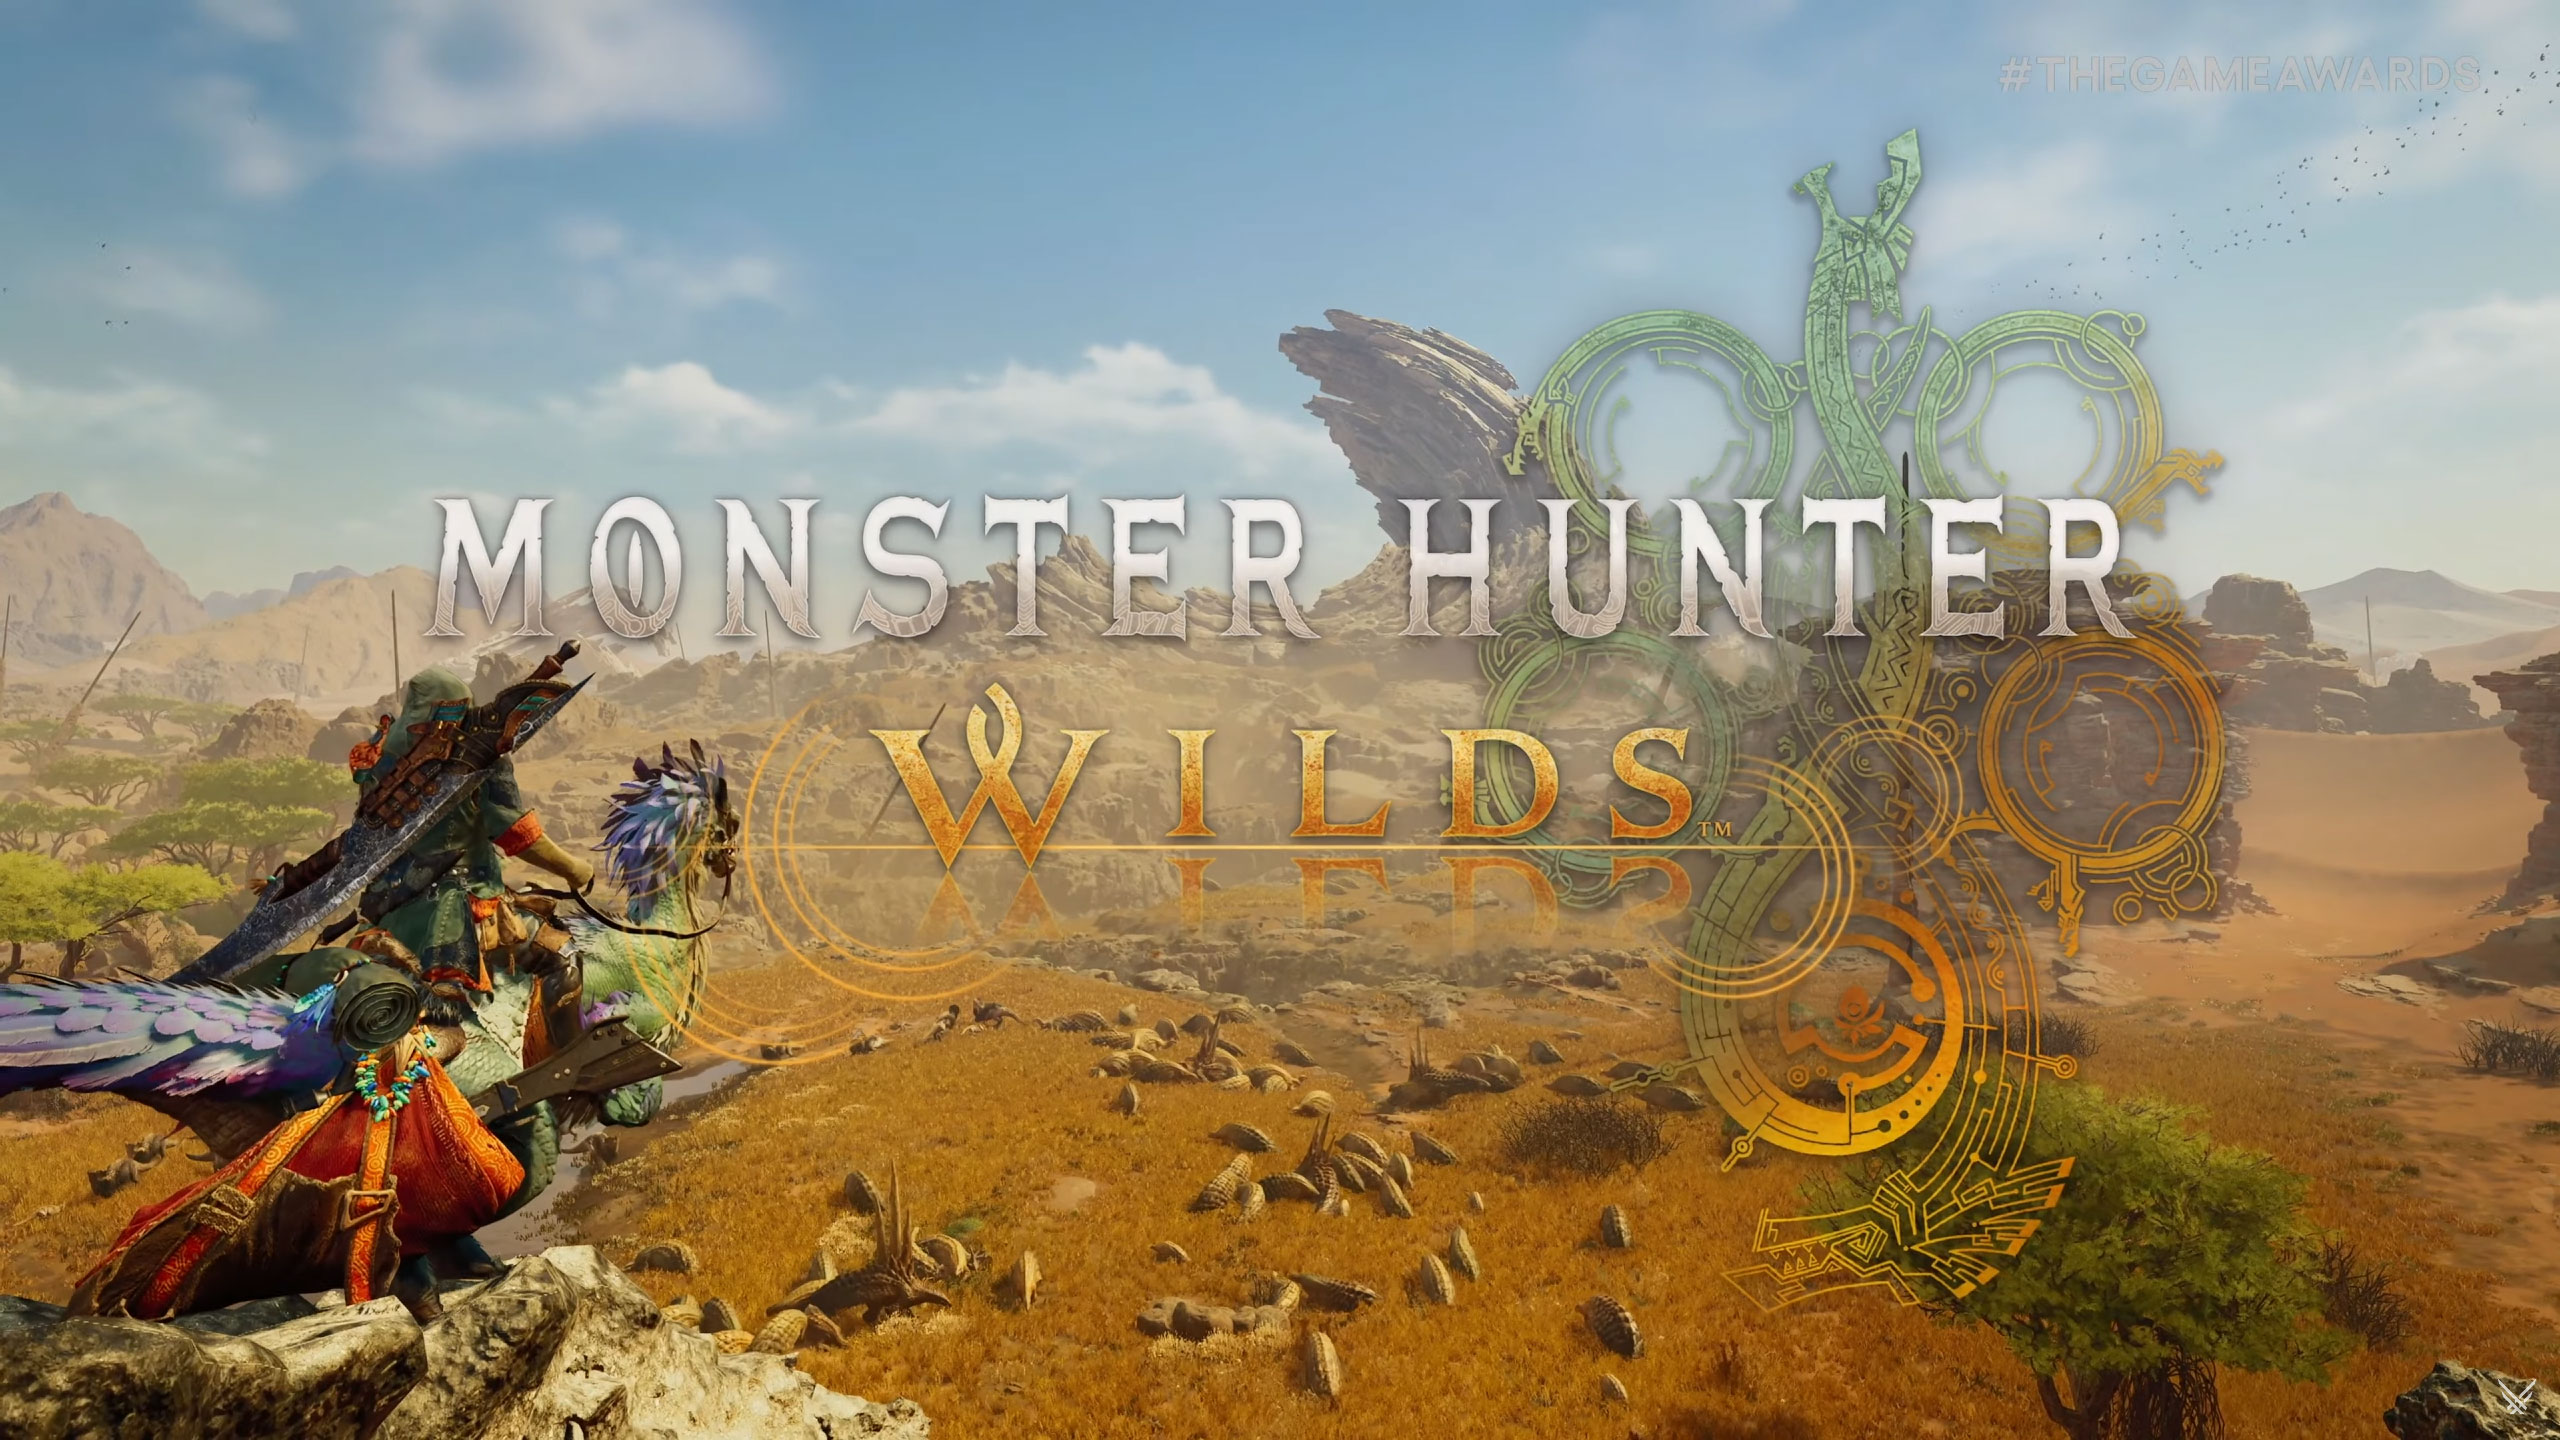 Monster Hunter Wilds has been announced and is slated for a 2025 release